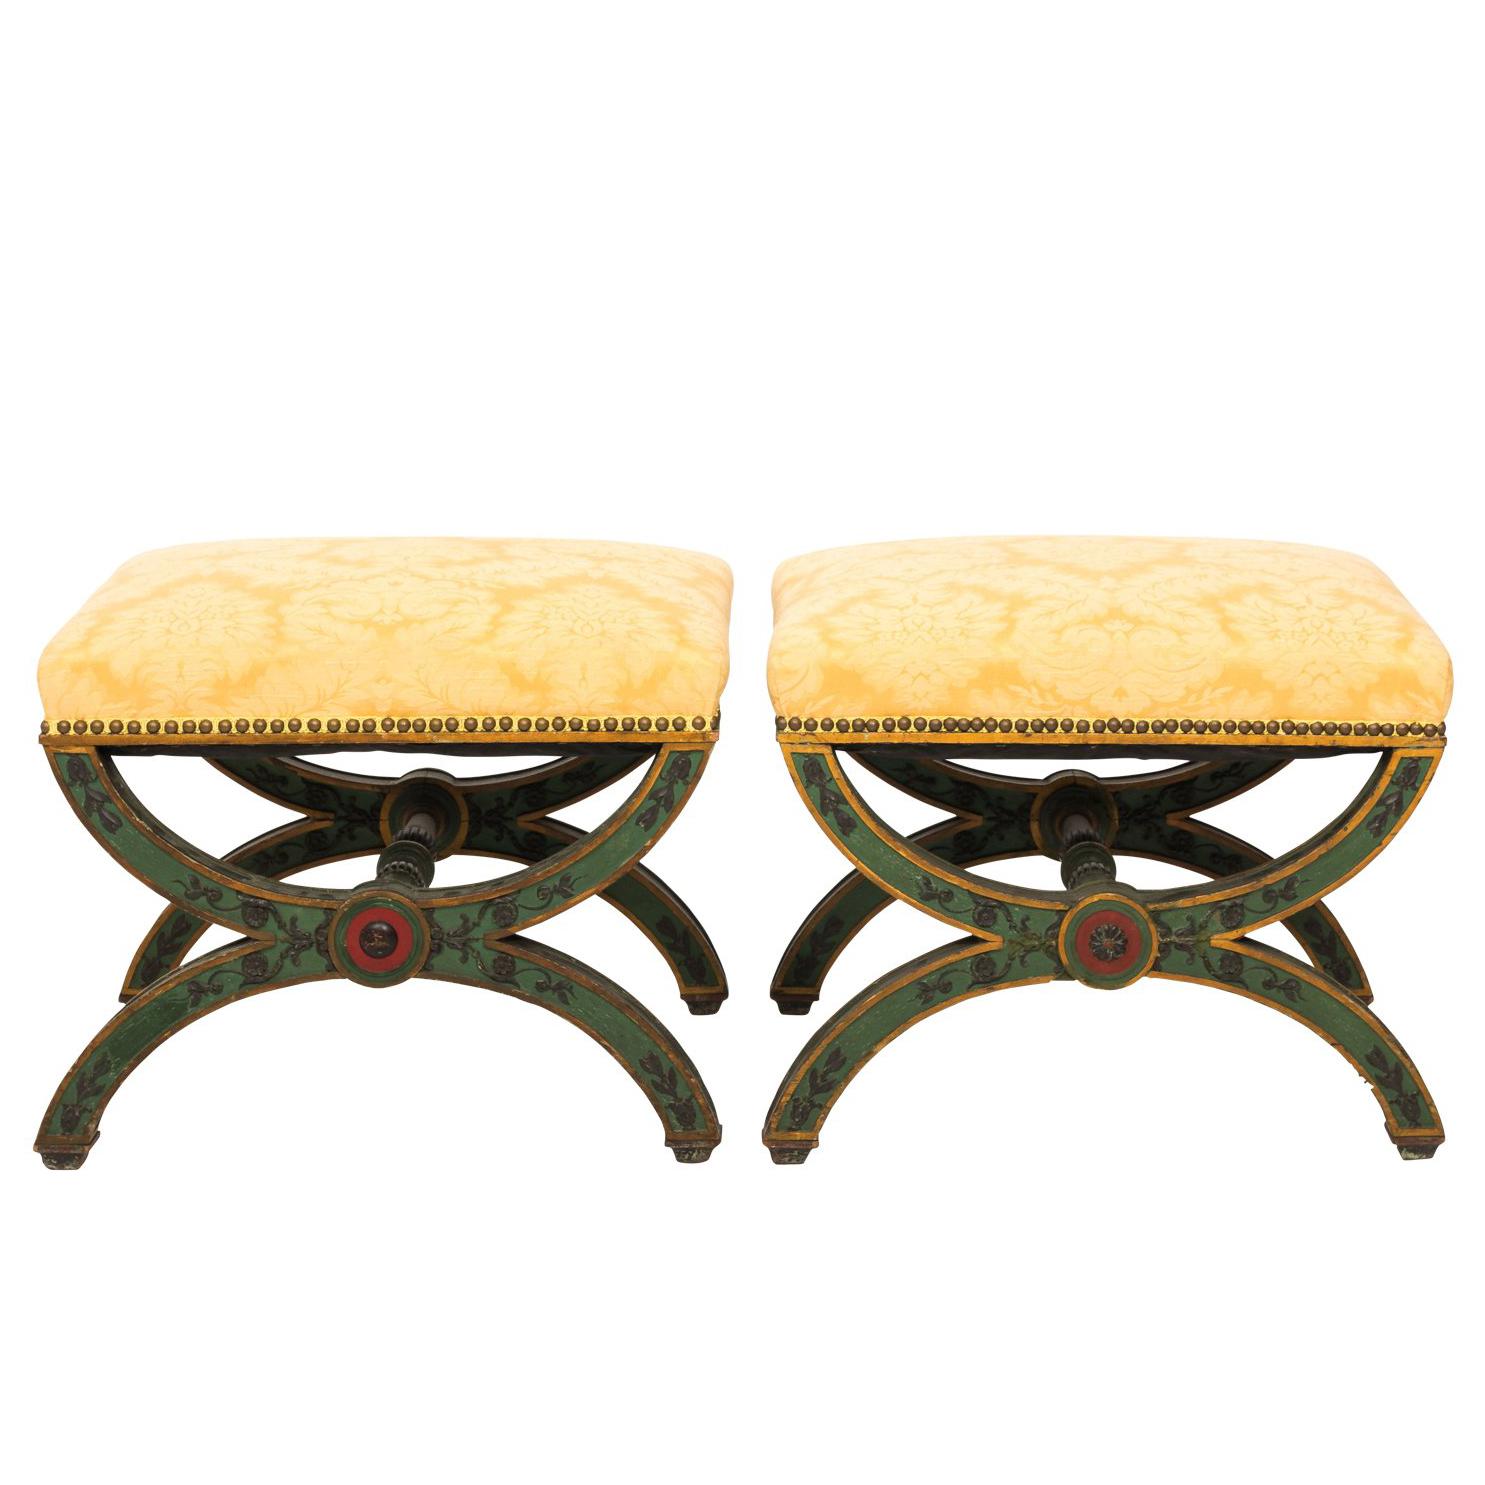 Pair of Late 19th Century Curule Style Benches